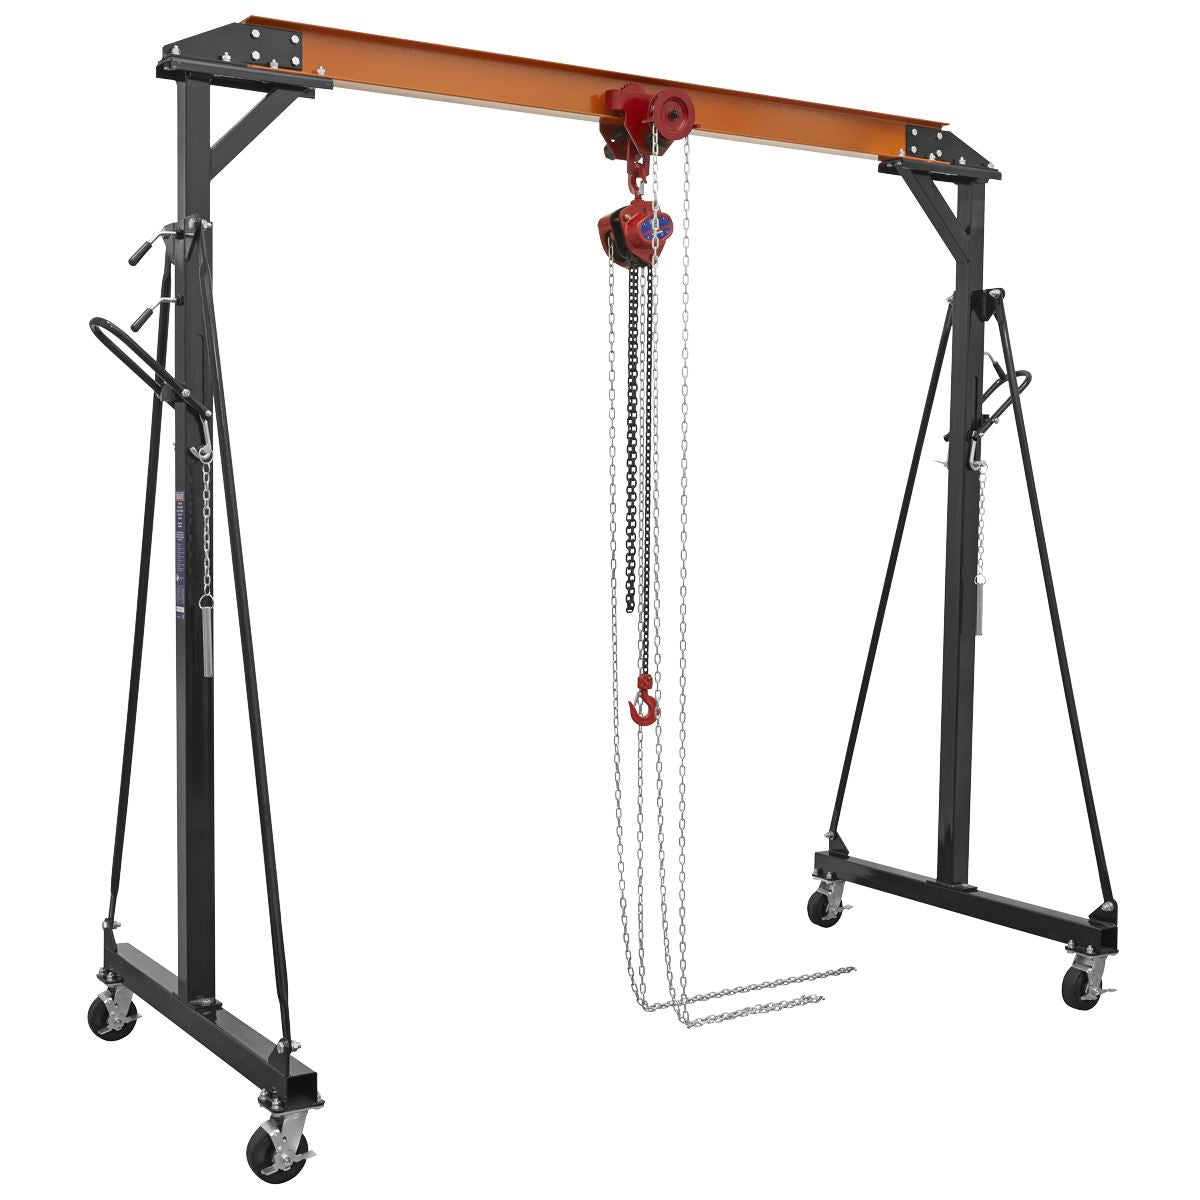 Sealey Portable Adjustable Gantry Crane with Geared Trolley Combo 1 Tonne